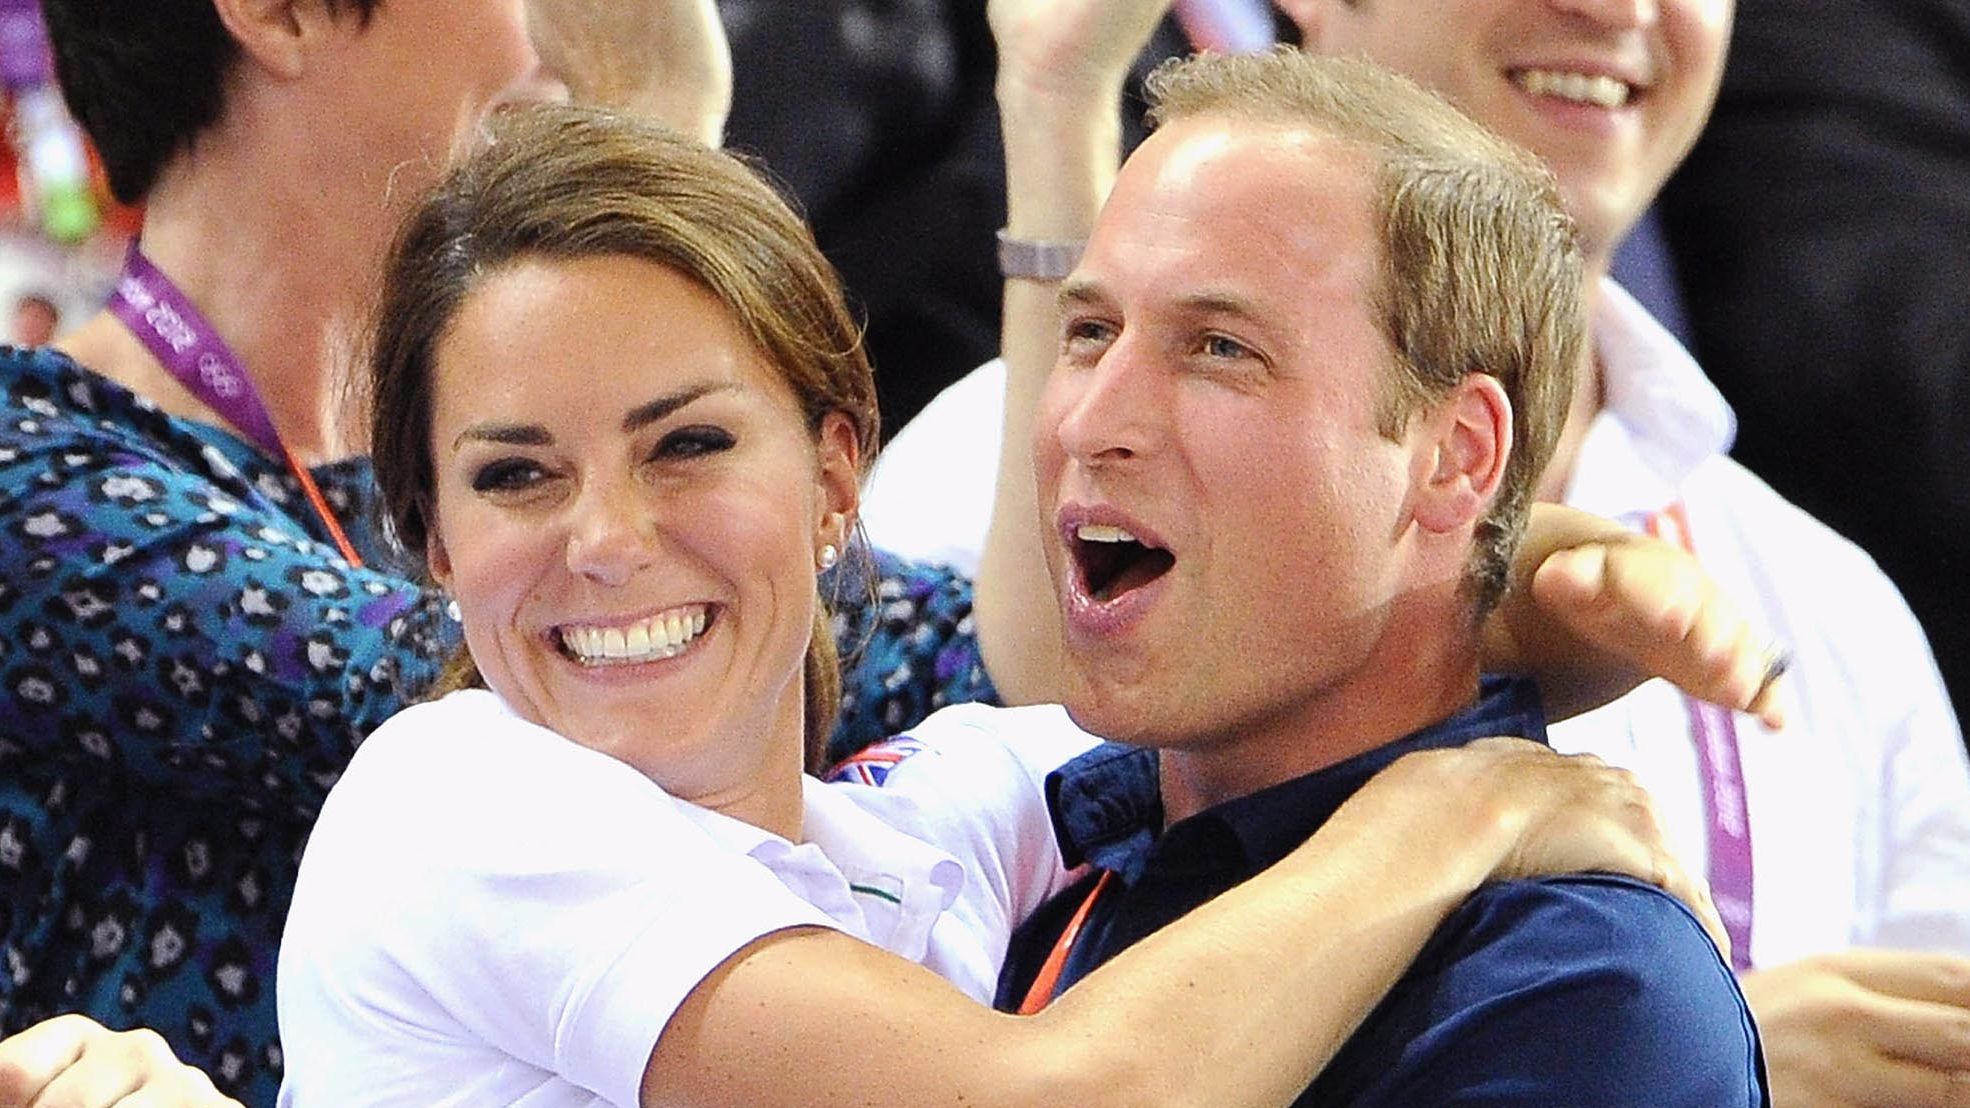 Catherine and William celebrate during cycling events at the Olympic Games in London in August 2012.